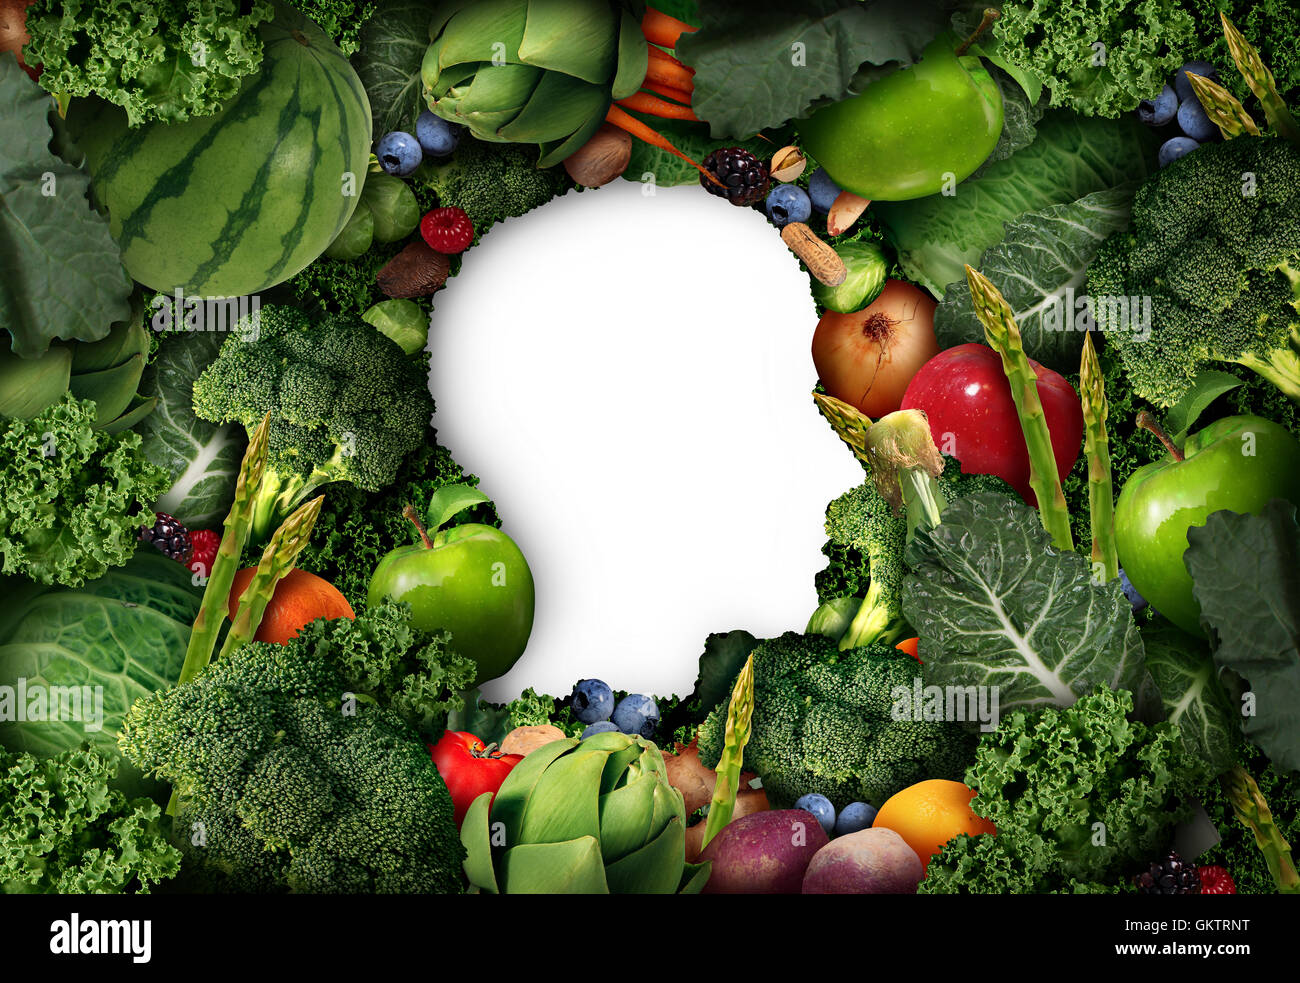 Fruit and vegetable thinking for human healthy diet concept as farm fresh produce shaped as a head symbol with vegetables and healthy natural food in a 3D illustration style. Stock Photo